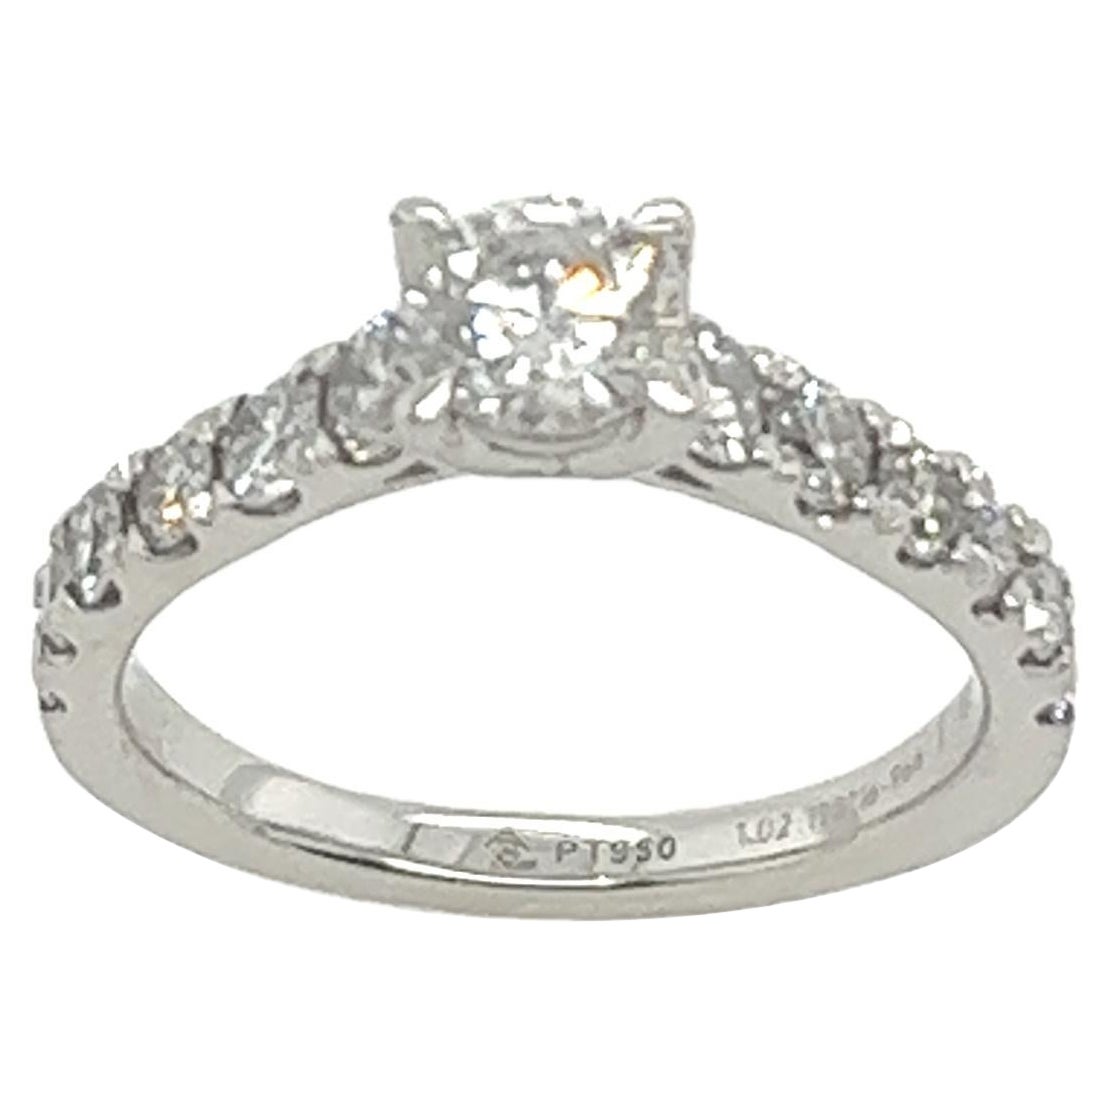 Platinum Diamond Solitaire Ring Set With 0.40ct Round Diamond & 0.62ct On Sides For Sale